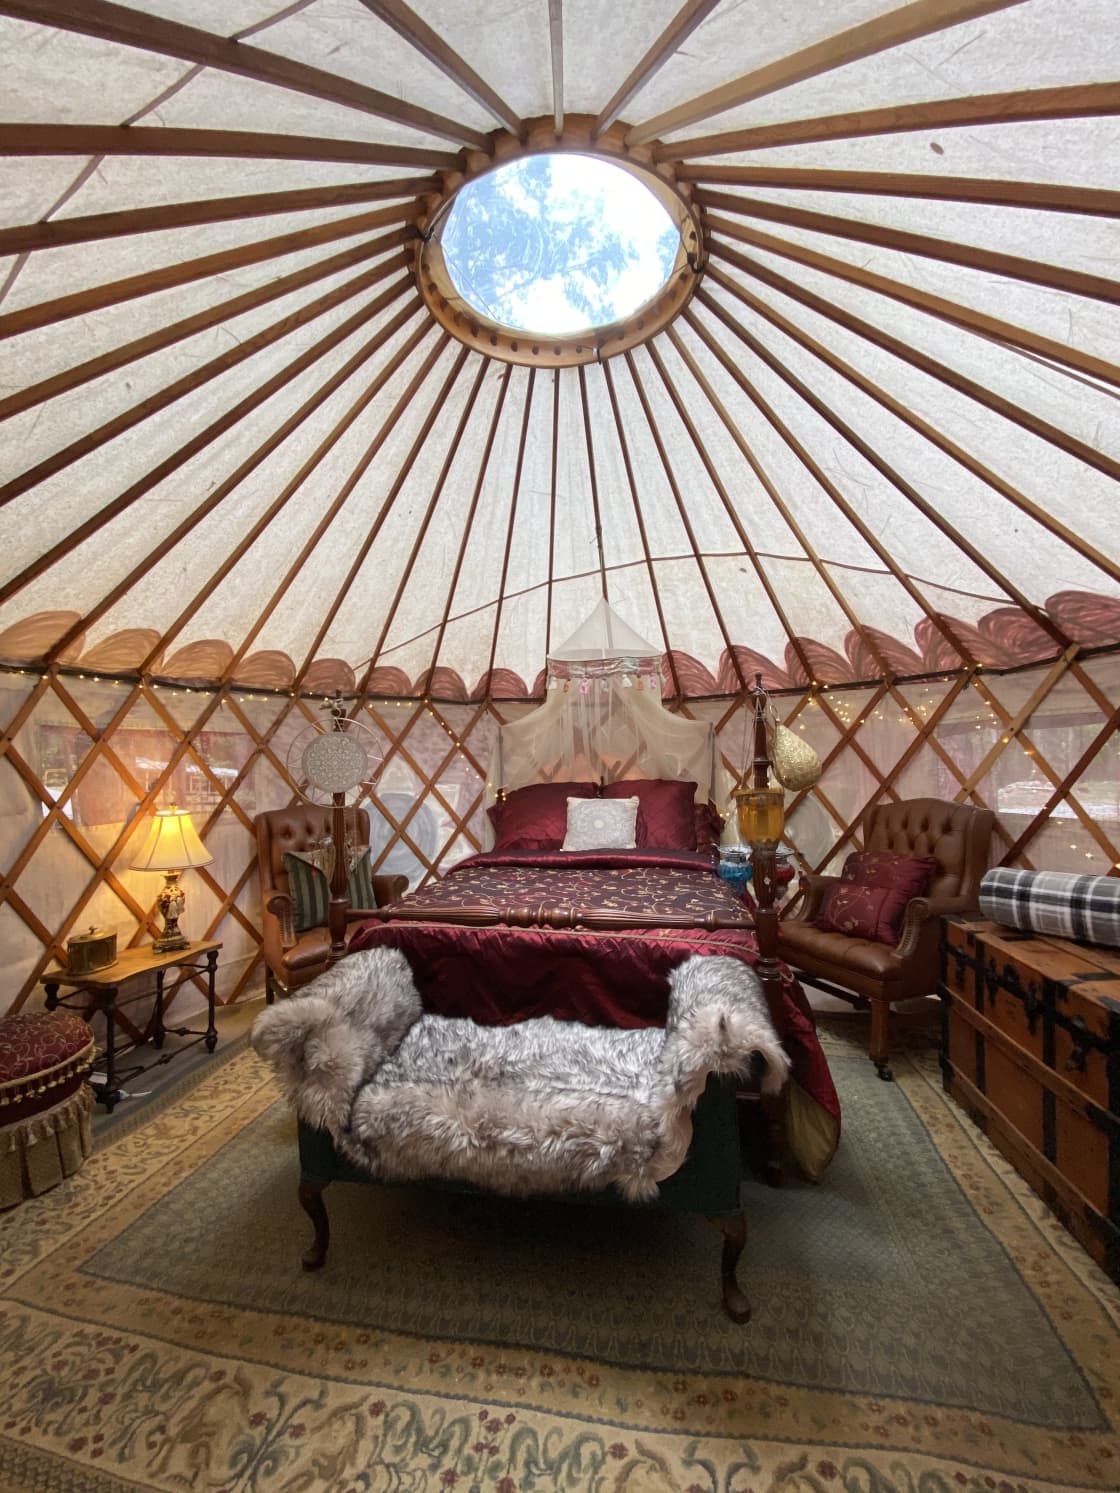 Victorian-Boho decor, a cozy full-size bed for a romantic getaway for two.